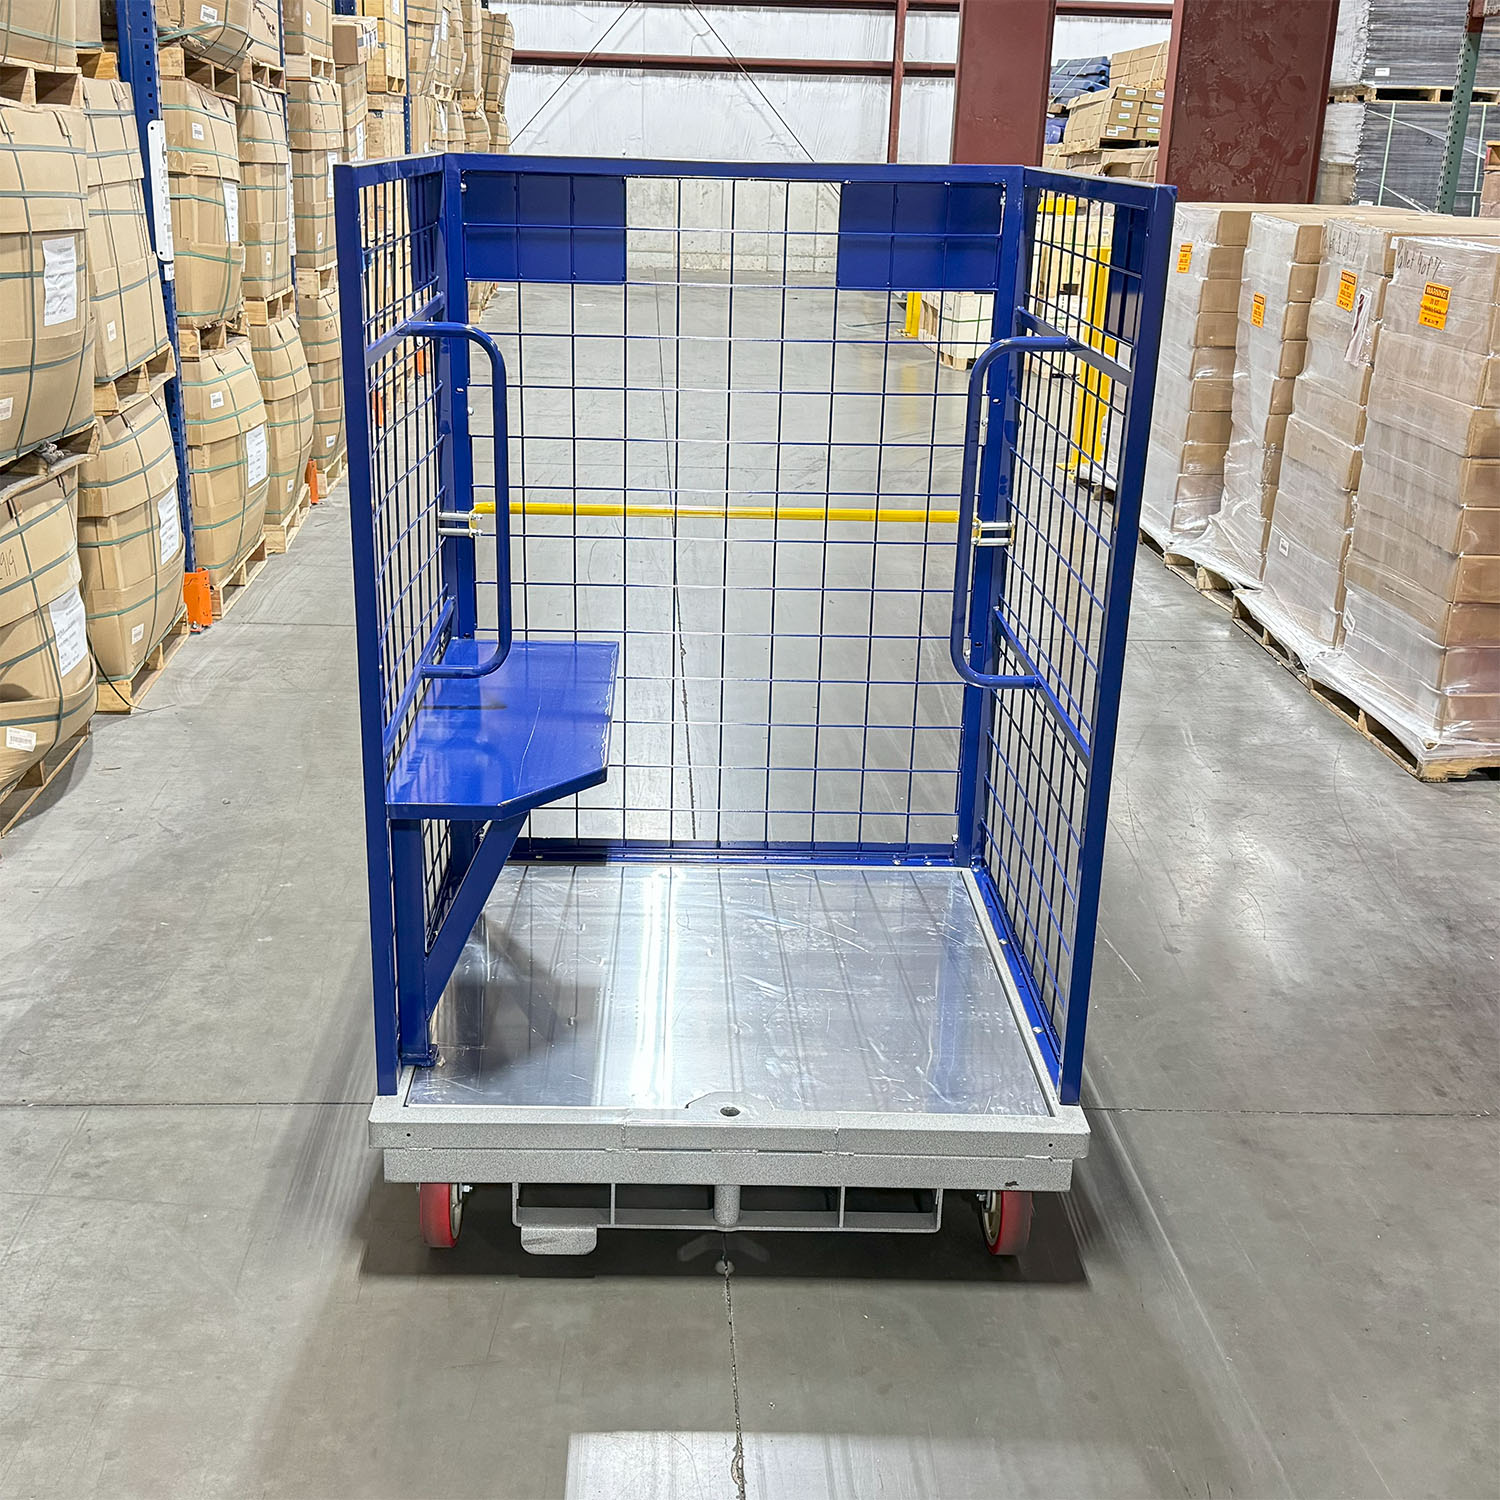 Heavy-duty cage cart Aluminum deck cart Order picking cart Warehouse cage cart Industrial cage cart Storage cage cart Lightweight cage cart Forklift compatible cart Reinforced tow socket cart Wire mesh cage cart Durable cage cart Lightweight and strong cart Easy maneuverability cart High visibility storage cart Secure storage cage cart Safe cage cart Fully assembled cage cart Heavy-duty steel pockets Aluminum deck Swivel casters Foot-activated brakes Forklift cage cart Industrial shelving cart Best cage cart for warehouse storage Lightweight aluminum deck cage cart Durable order picking cage cart High vertical pick cage cart Reinforced tow socket for cage cart Wire mesh sides cage cart